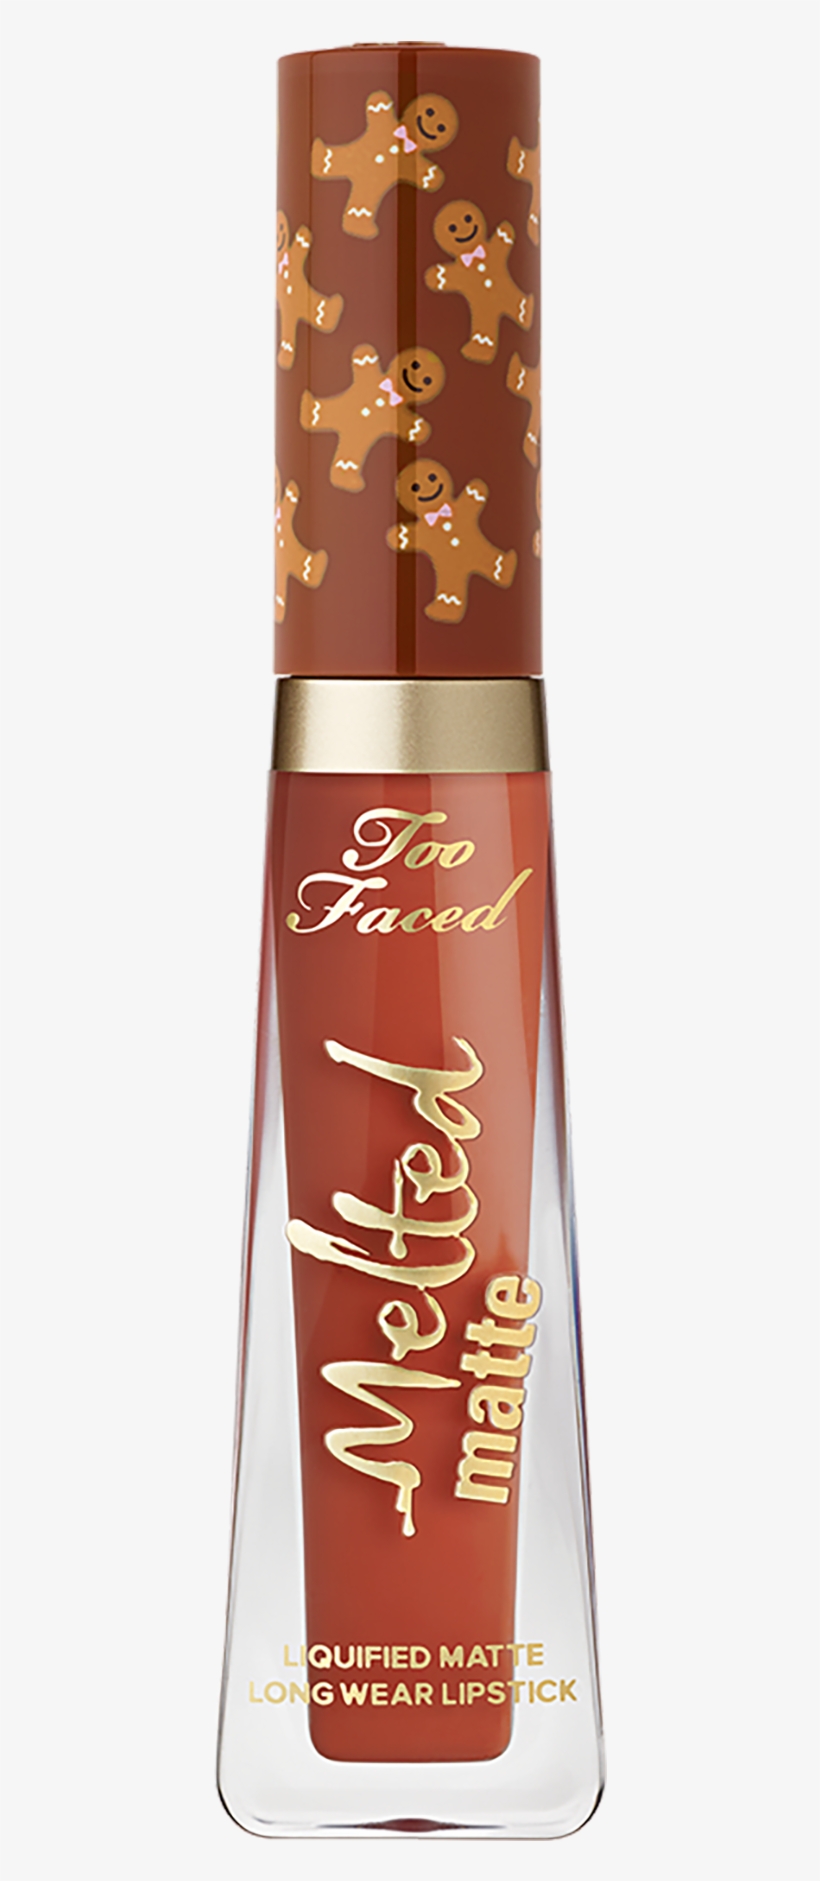 Melted Matte - Gingerbread - Too Faced Gingerbread Spice, transparent png #457779